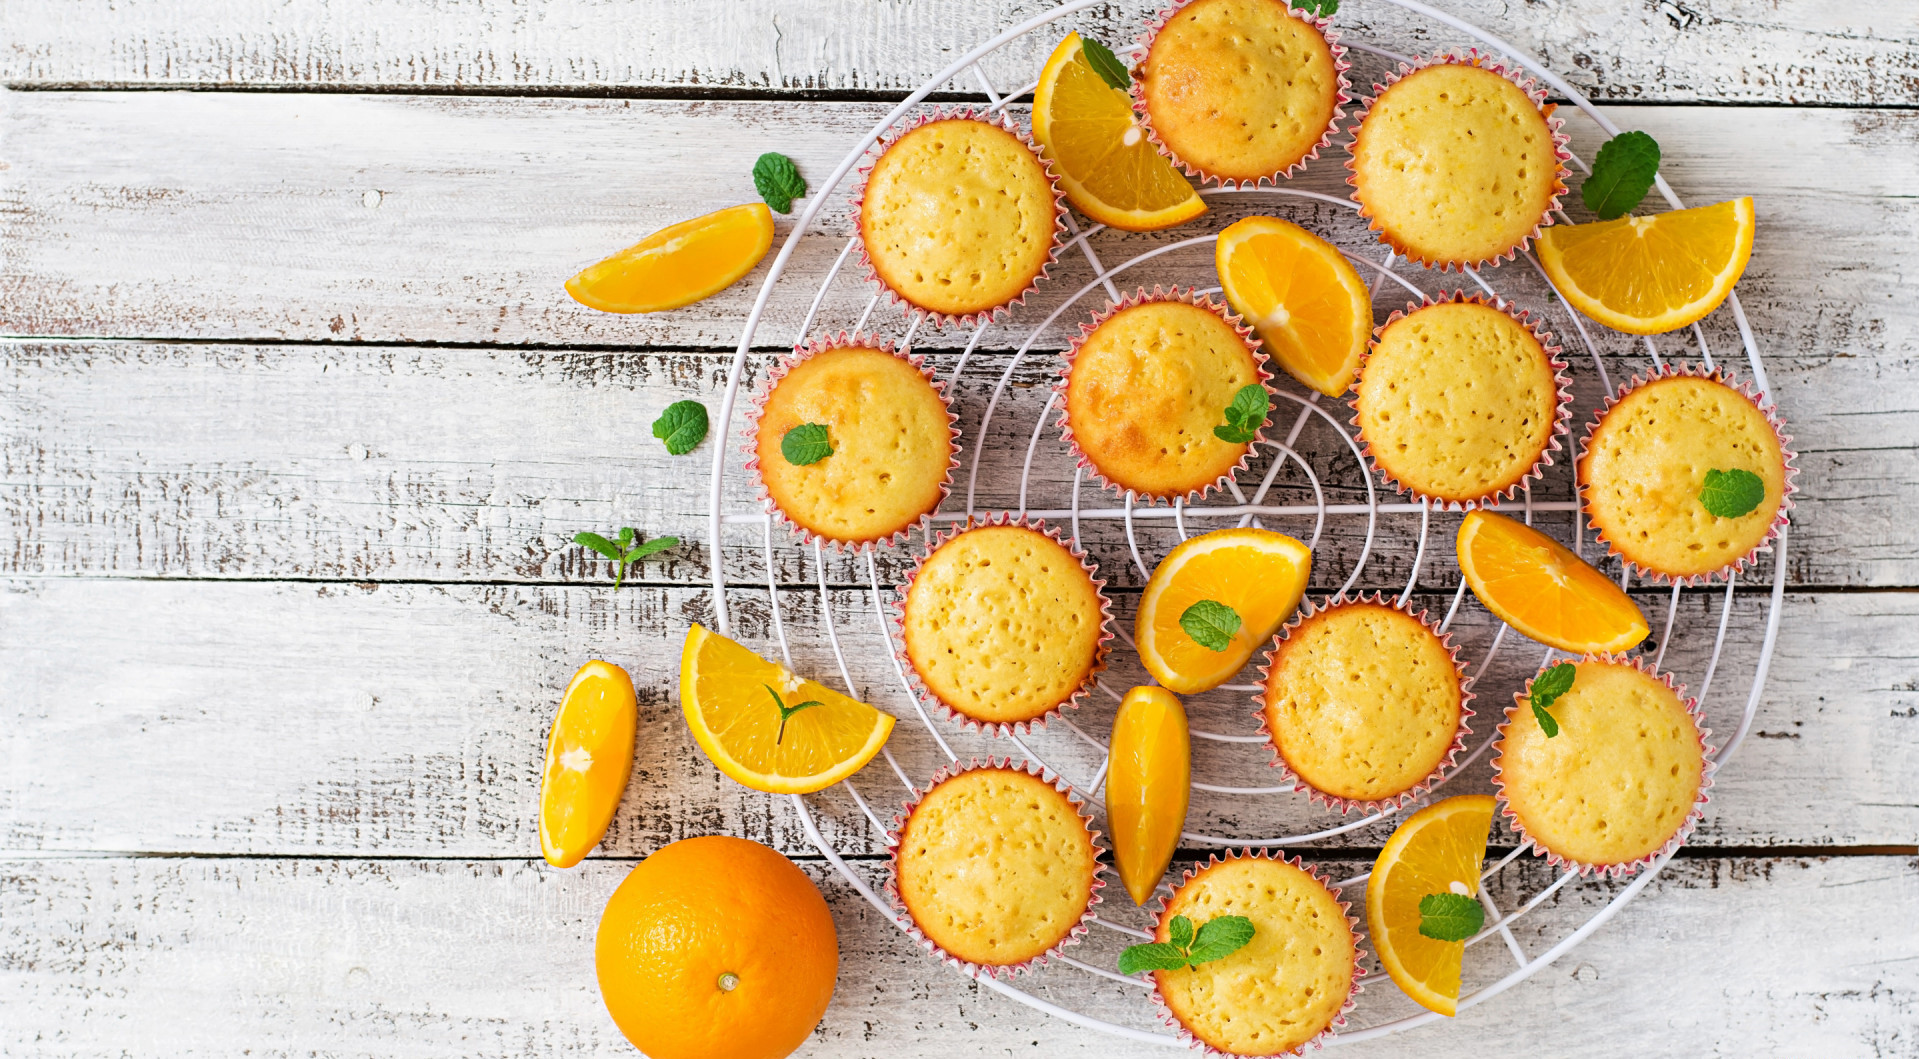 Muffins Colorful Sweets Food Fruit Orange Fruit Mint Leaves Wooden Surface Leaves Top View 1919x1059